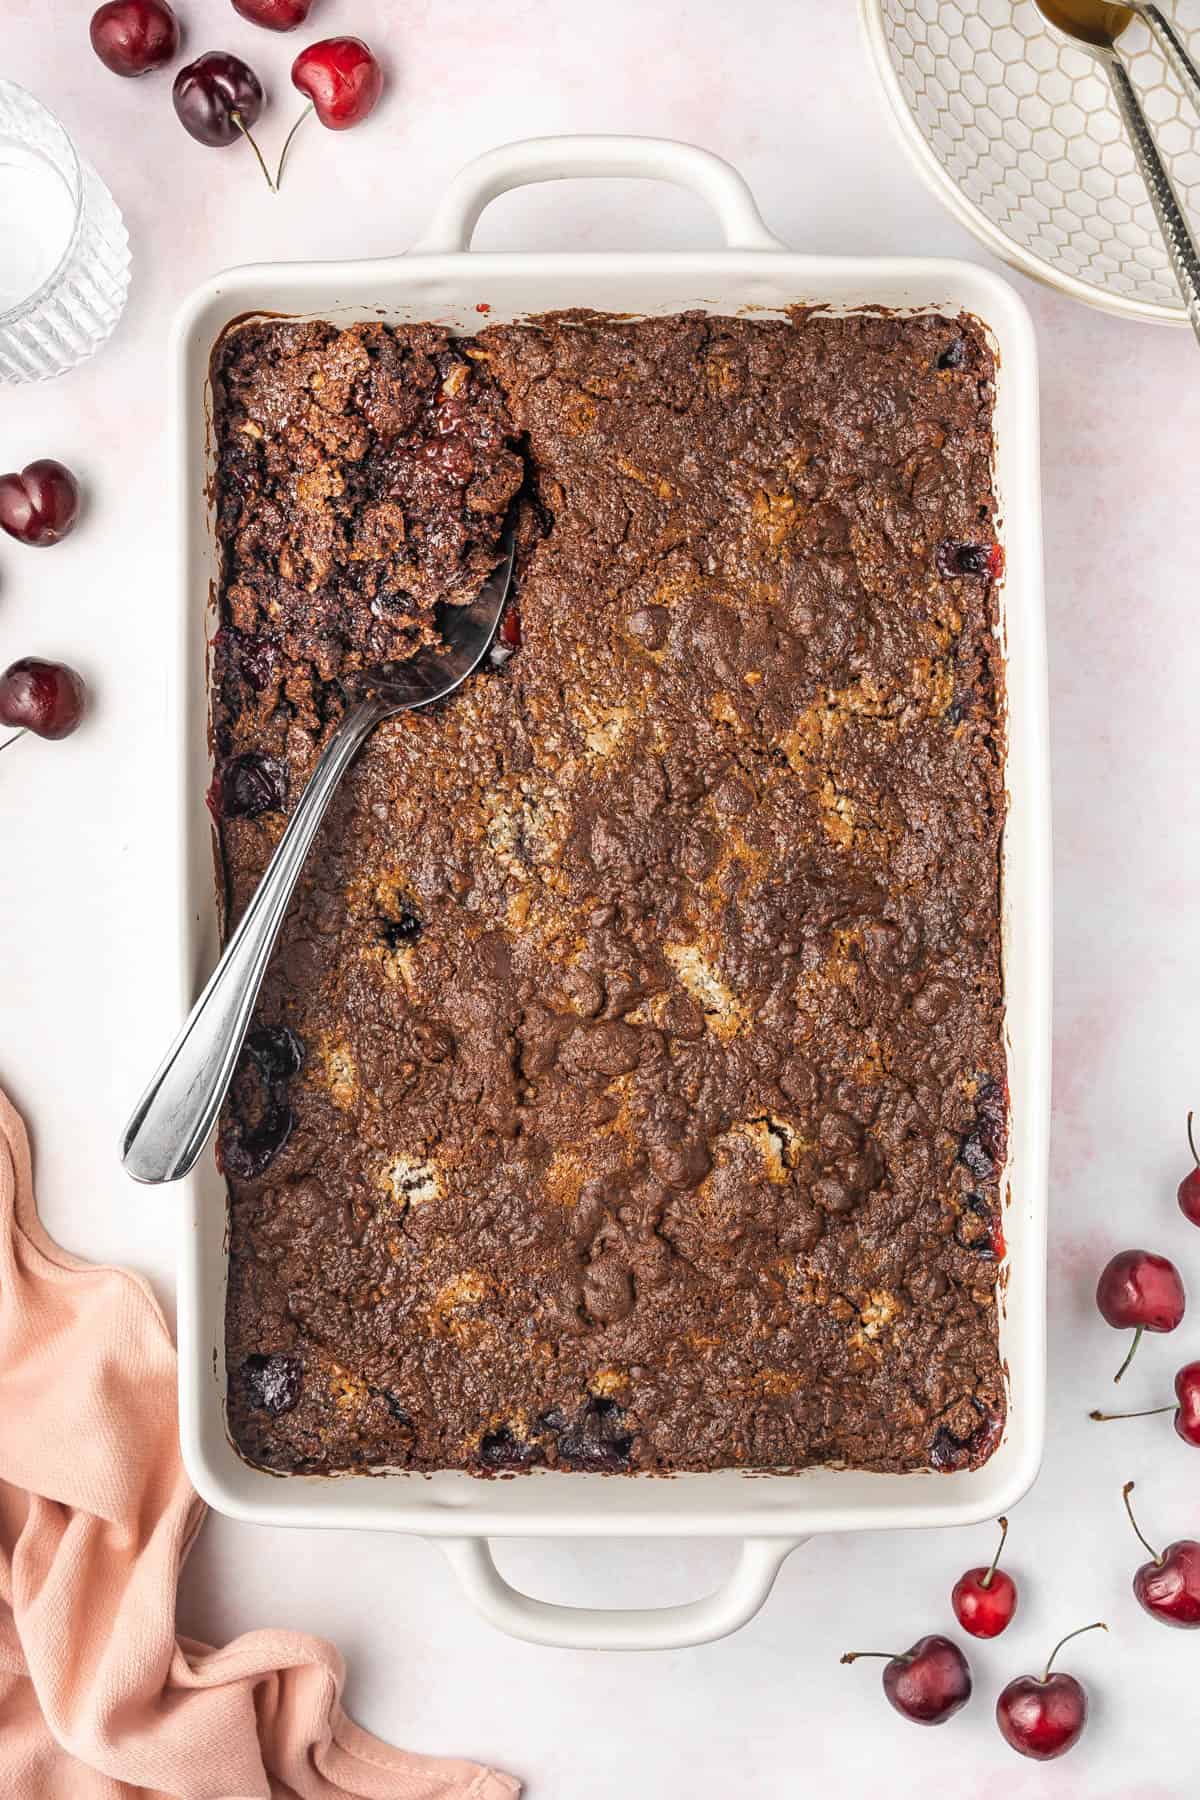 Baked chocolate cherry dump cake with a serving spoon in it.